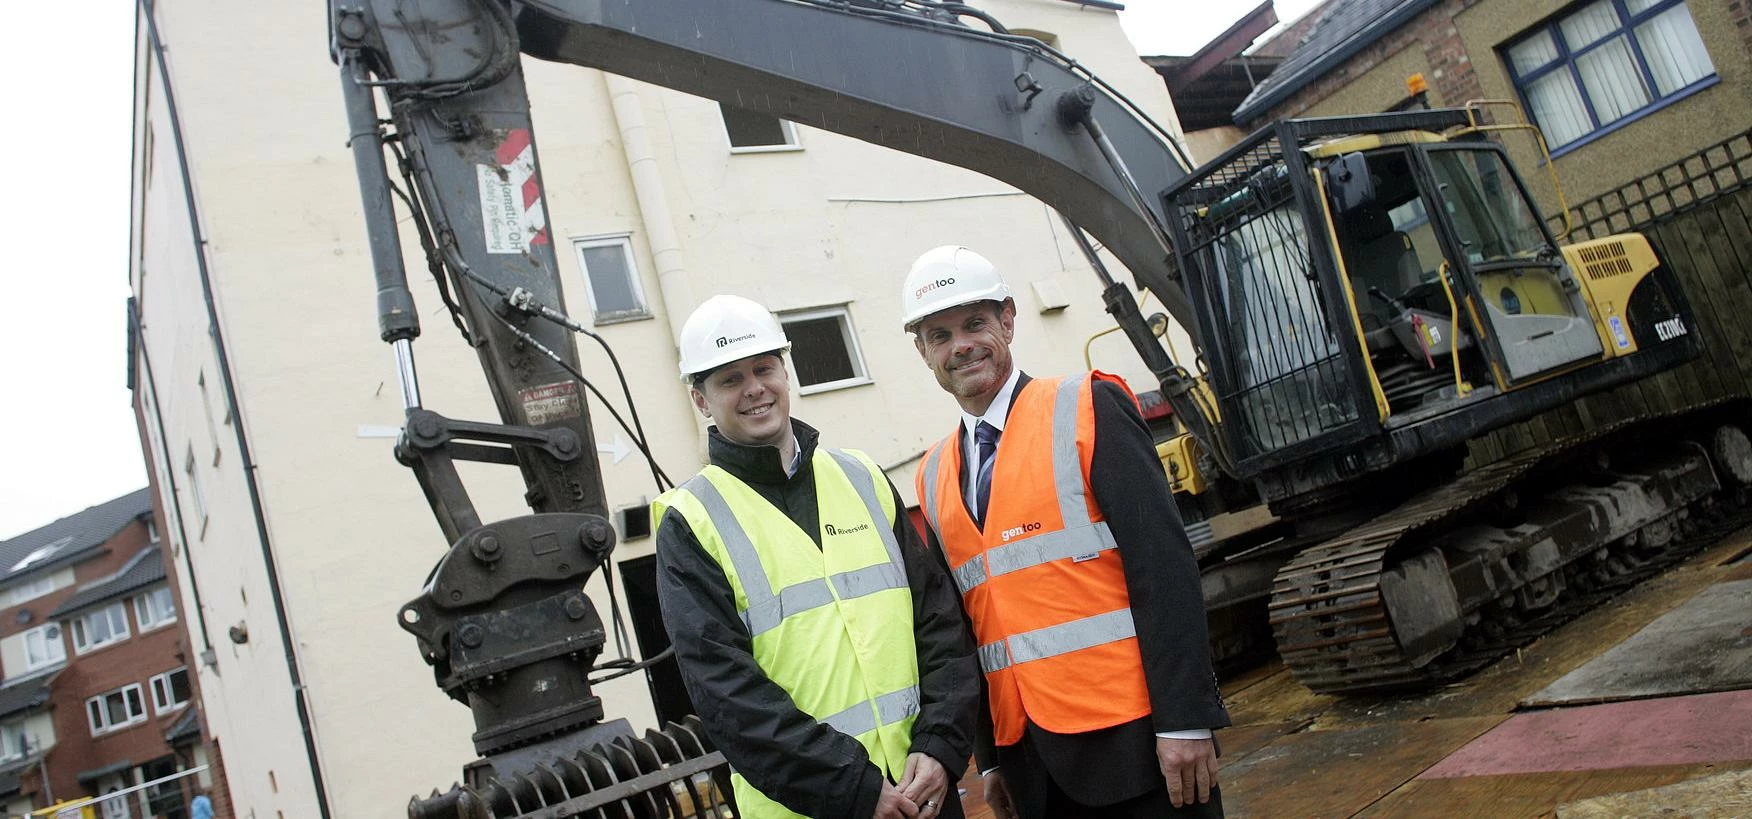 From left to right: Dominic Beha Senior Project Manager at Riverside and Paul Woods Contracts Manage